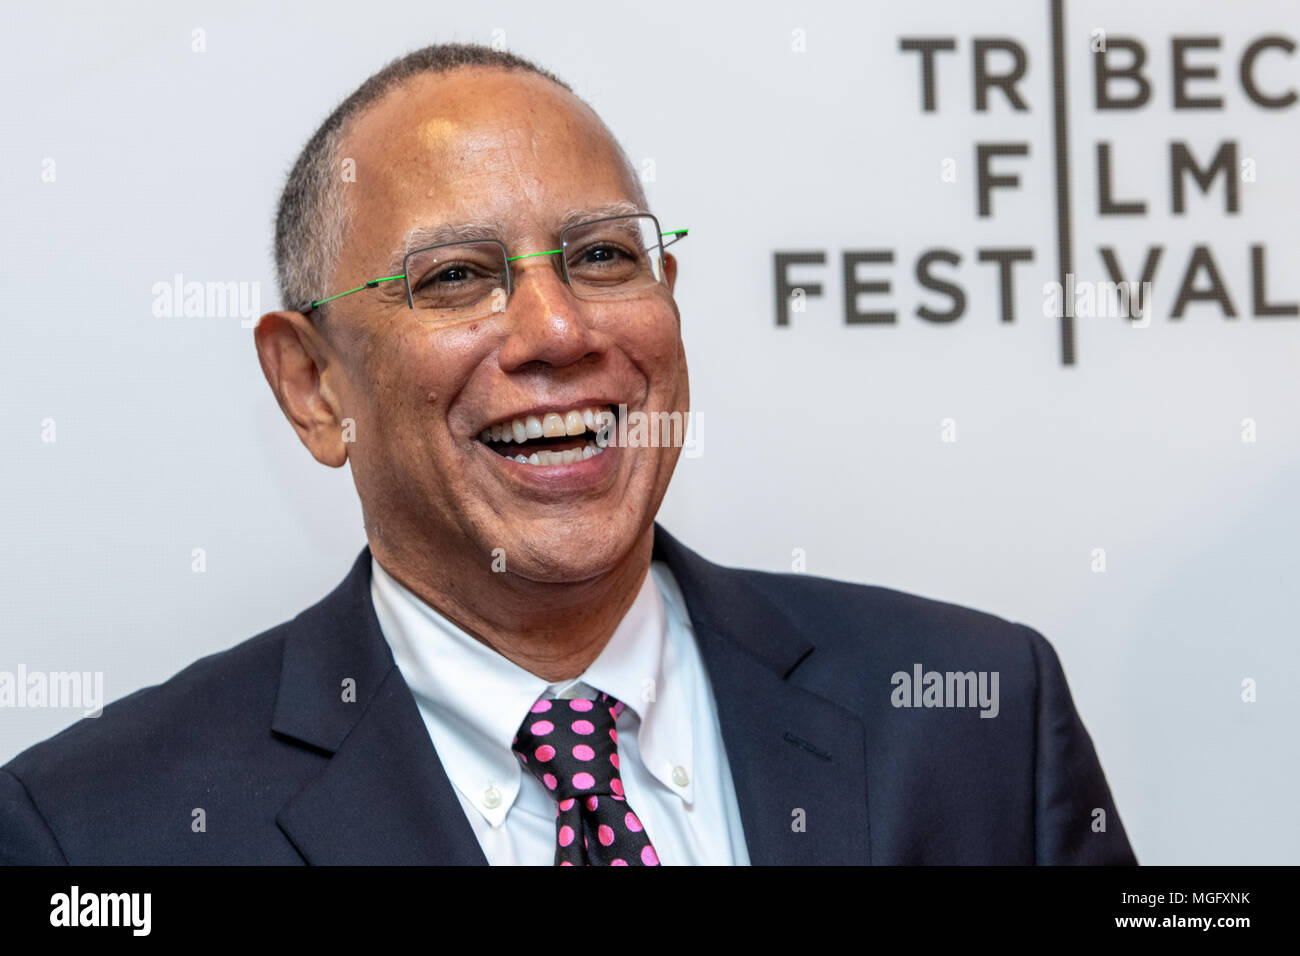 New York, USA, 28 April 2018. The New York Times Executive Editor Dean Baquet  attends the premiere of 'The Fourth Estate' at the 2018 Tribeca Film Festival in New York city.   Photo by Enrique Shore/Alamy Live News Stock Photo